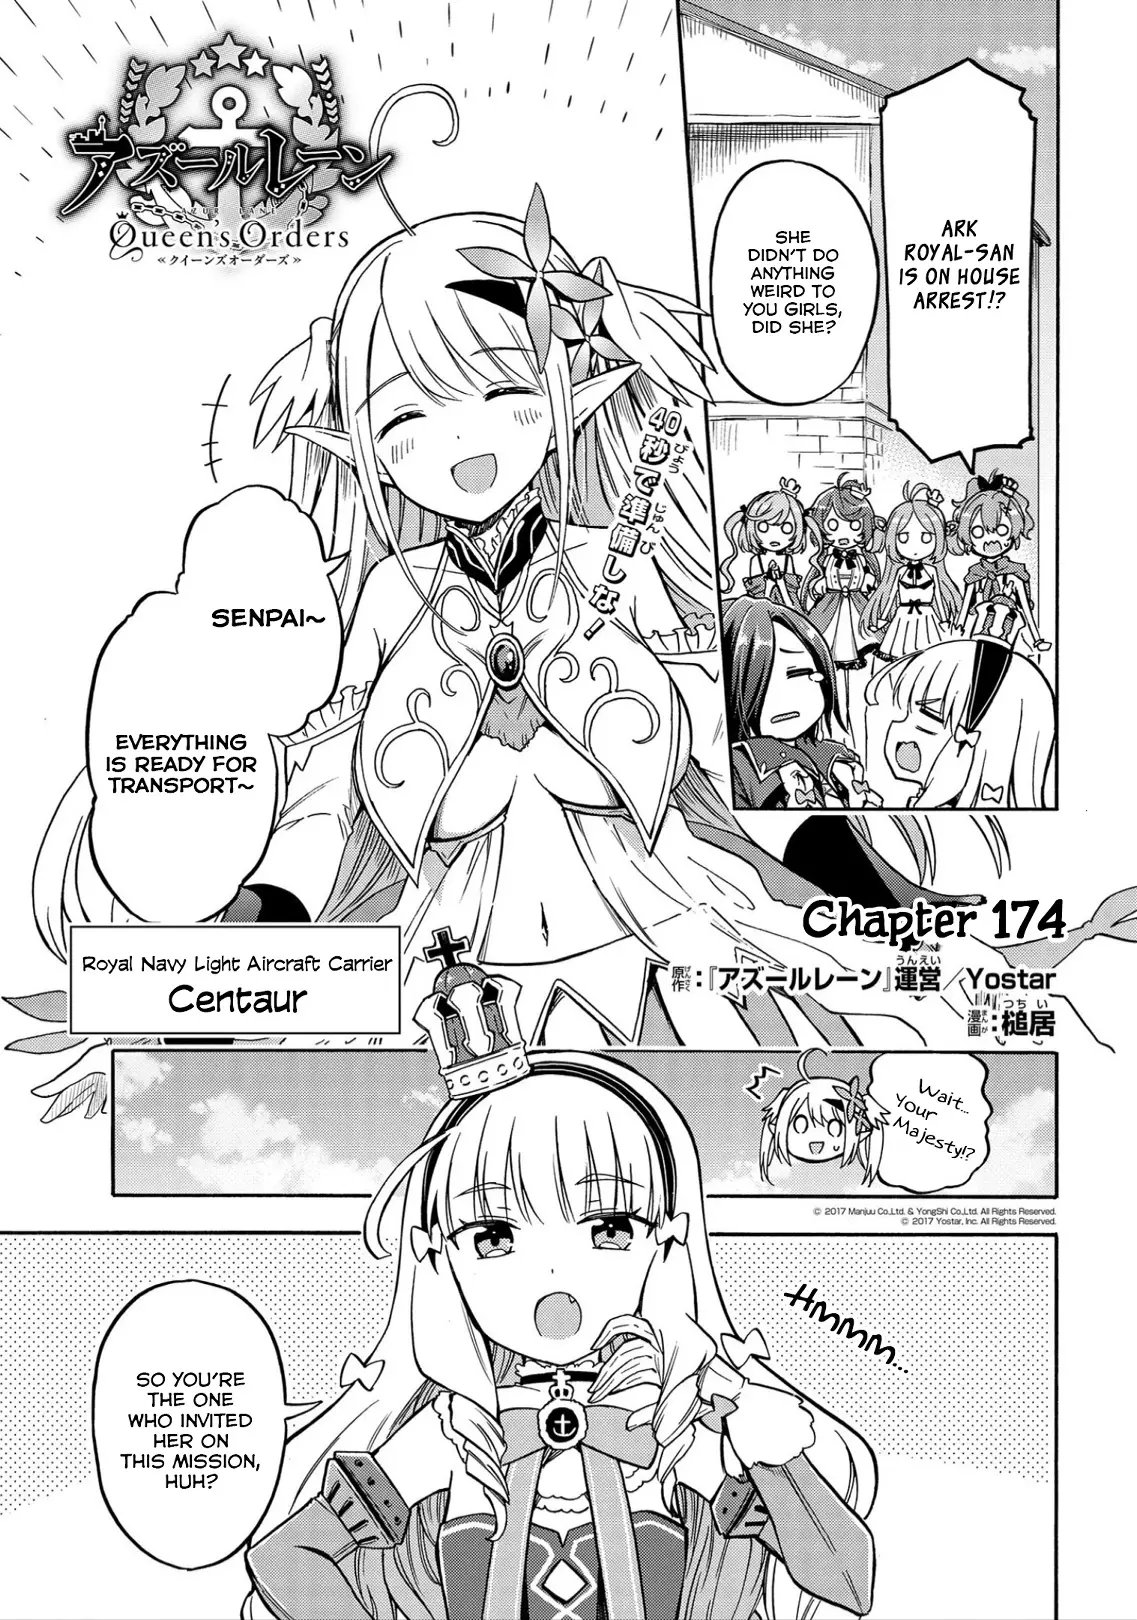 Azur Lane: Queen's Orders - 174 page 1-211db08f